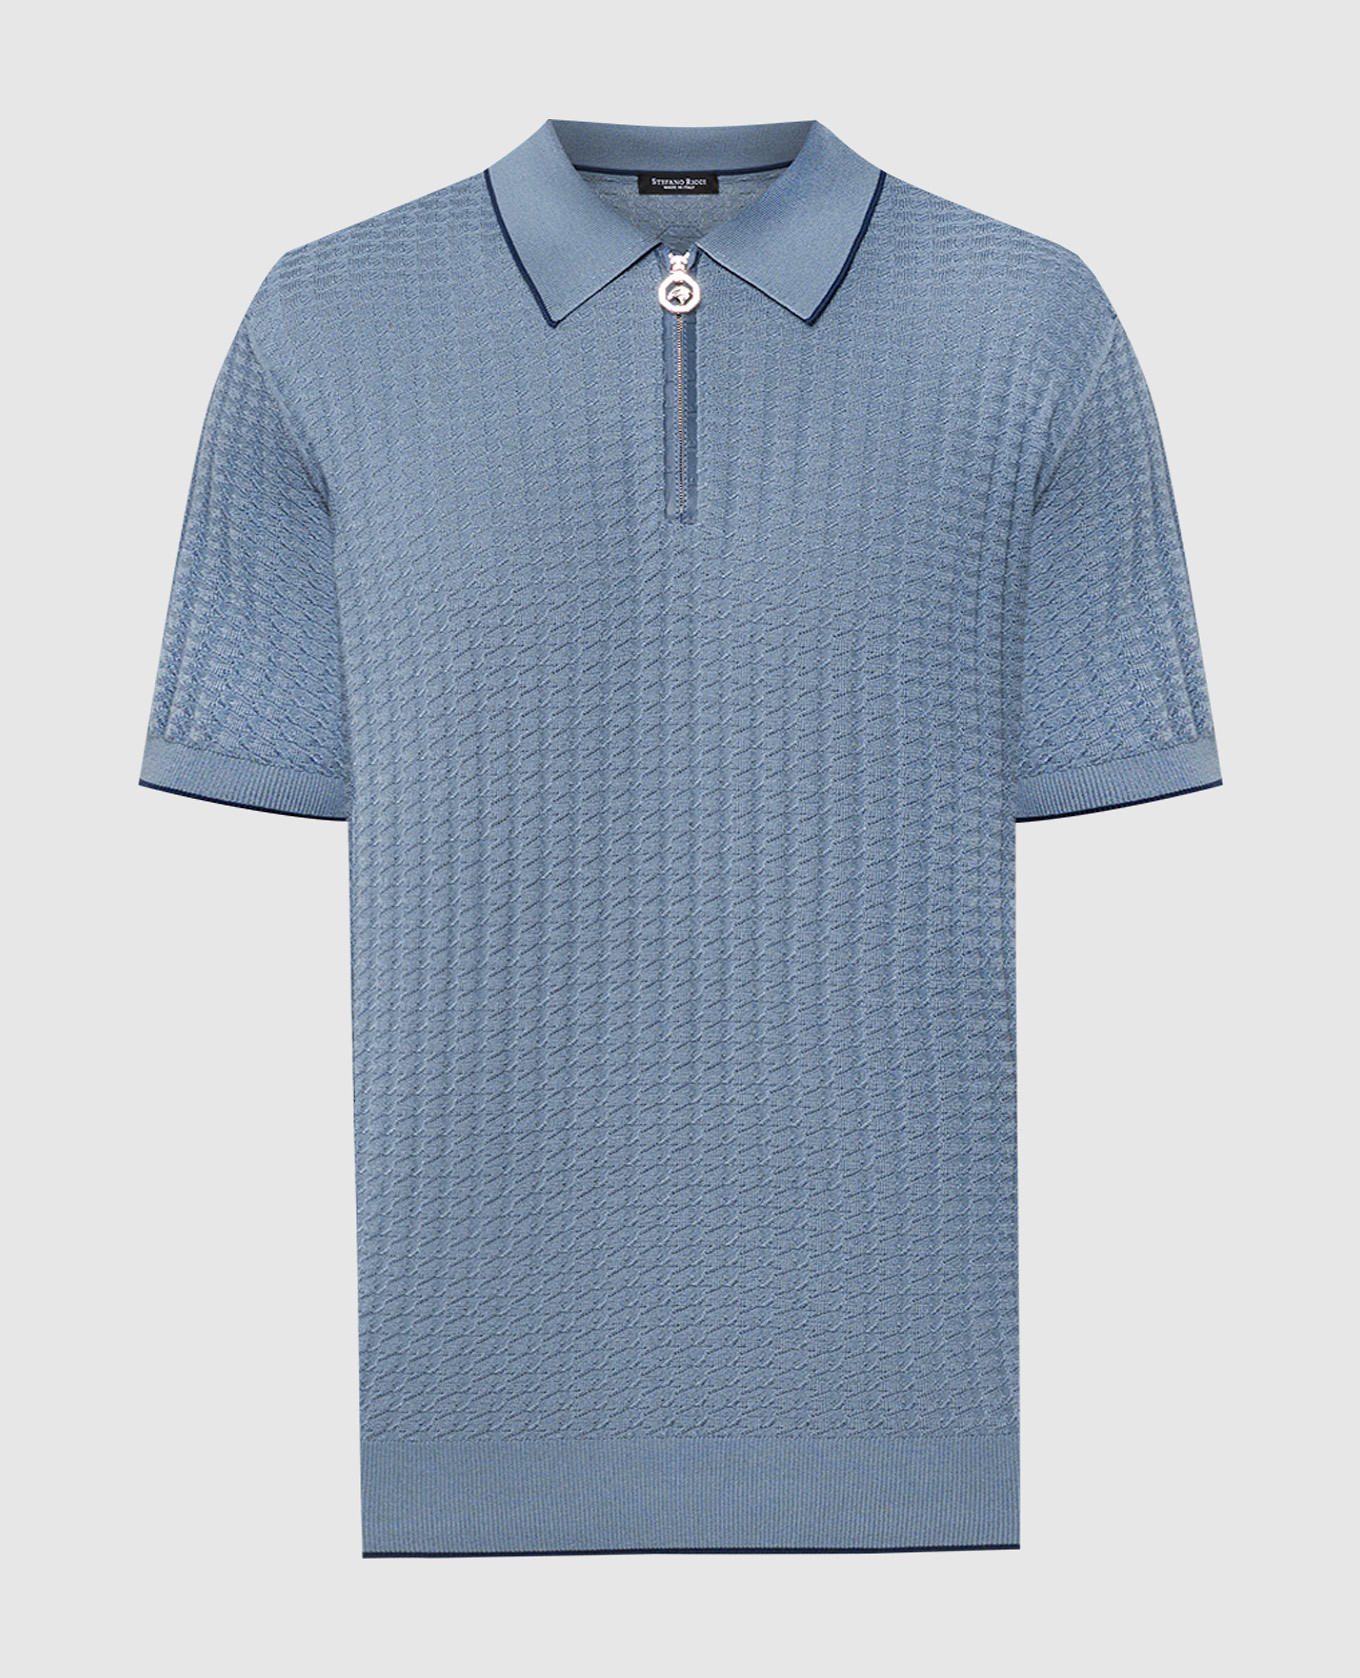 Blue polo with silk in a textured pattern with a logo